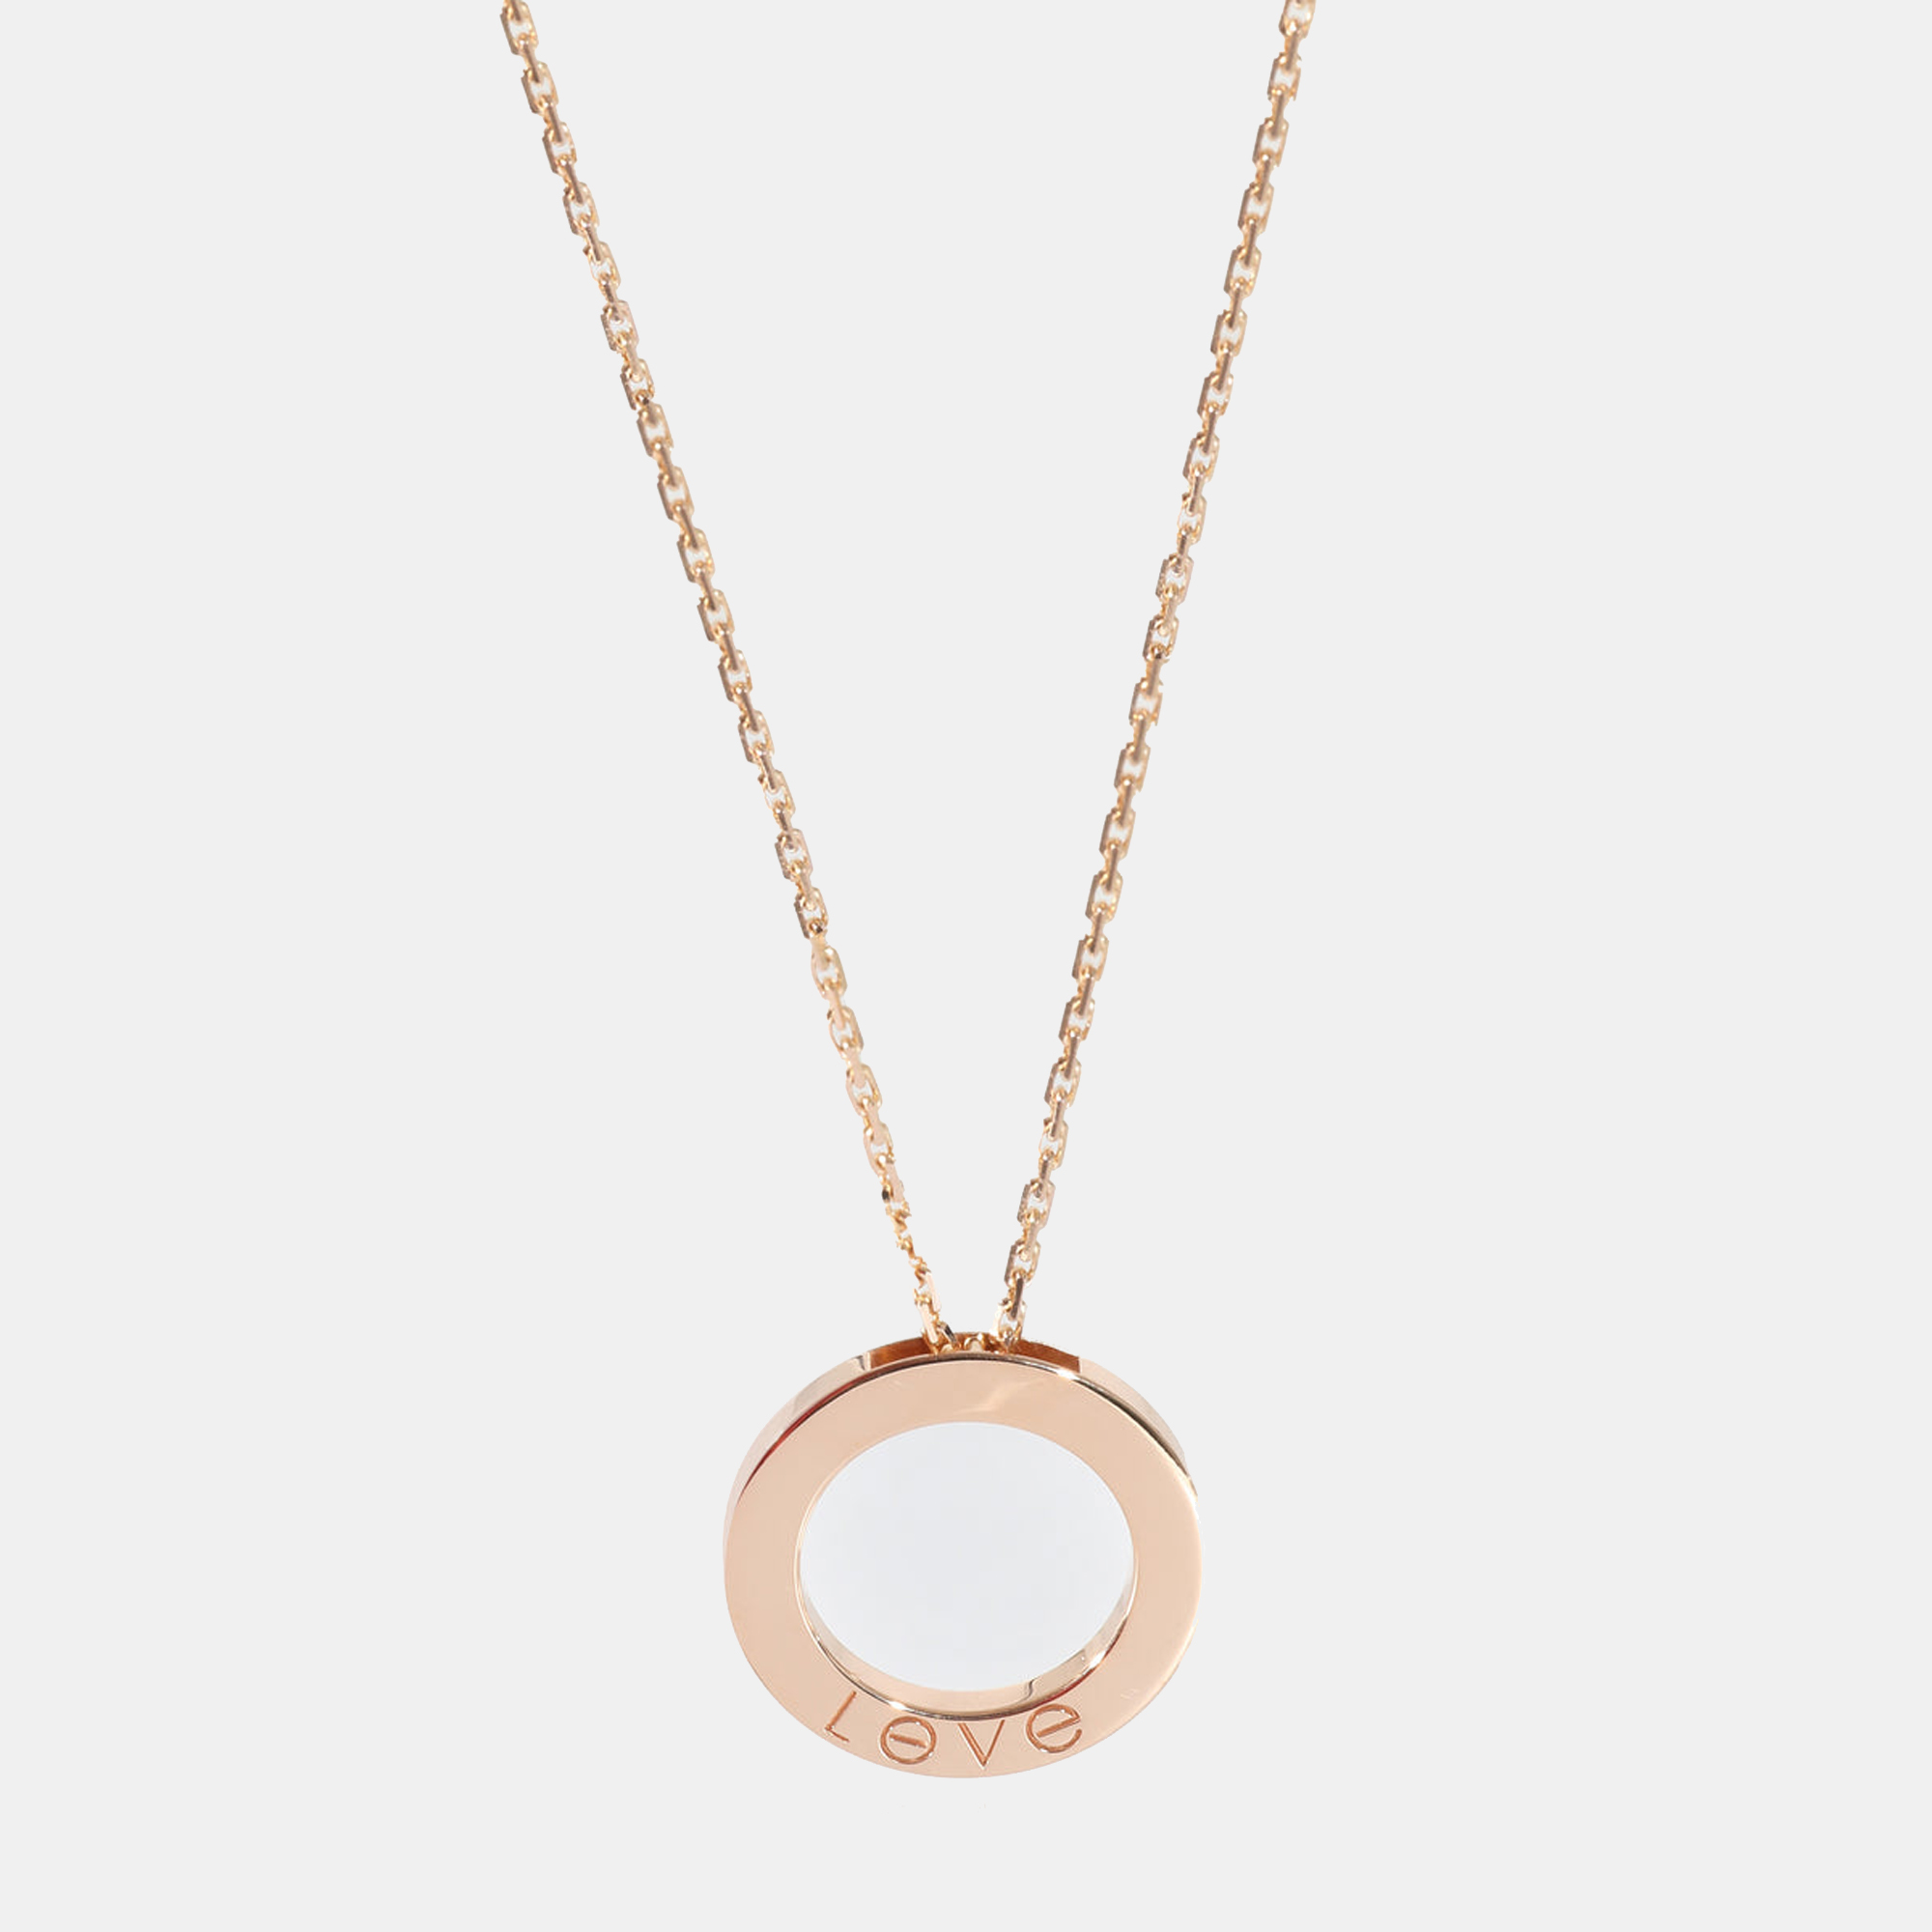 Cartier Love Diamond Necklace In 18k Rose Gold